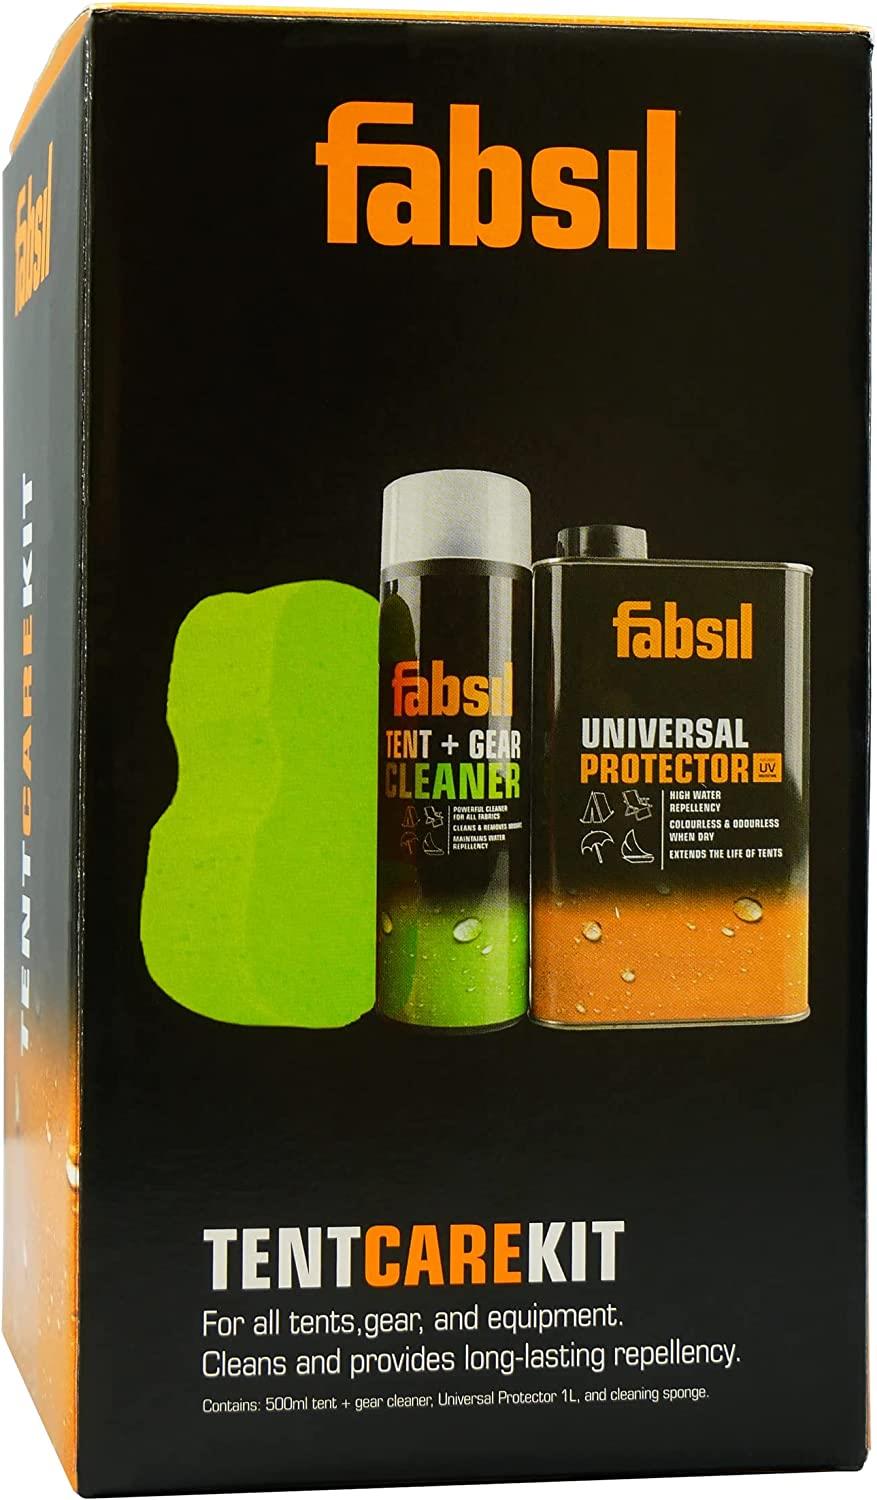 Fabsil Tent Care Kit Cleaner